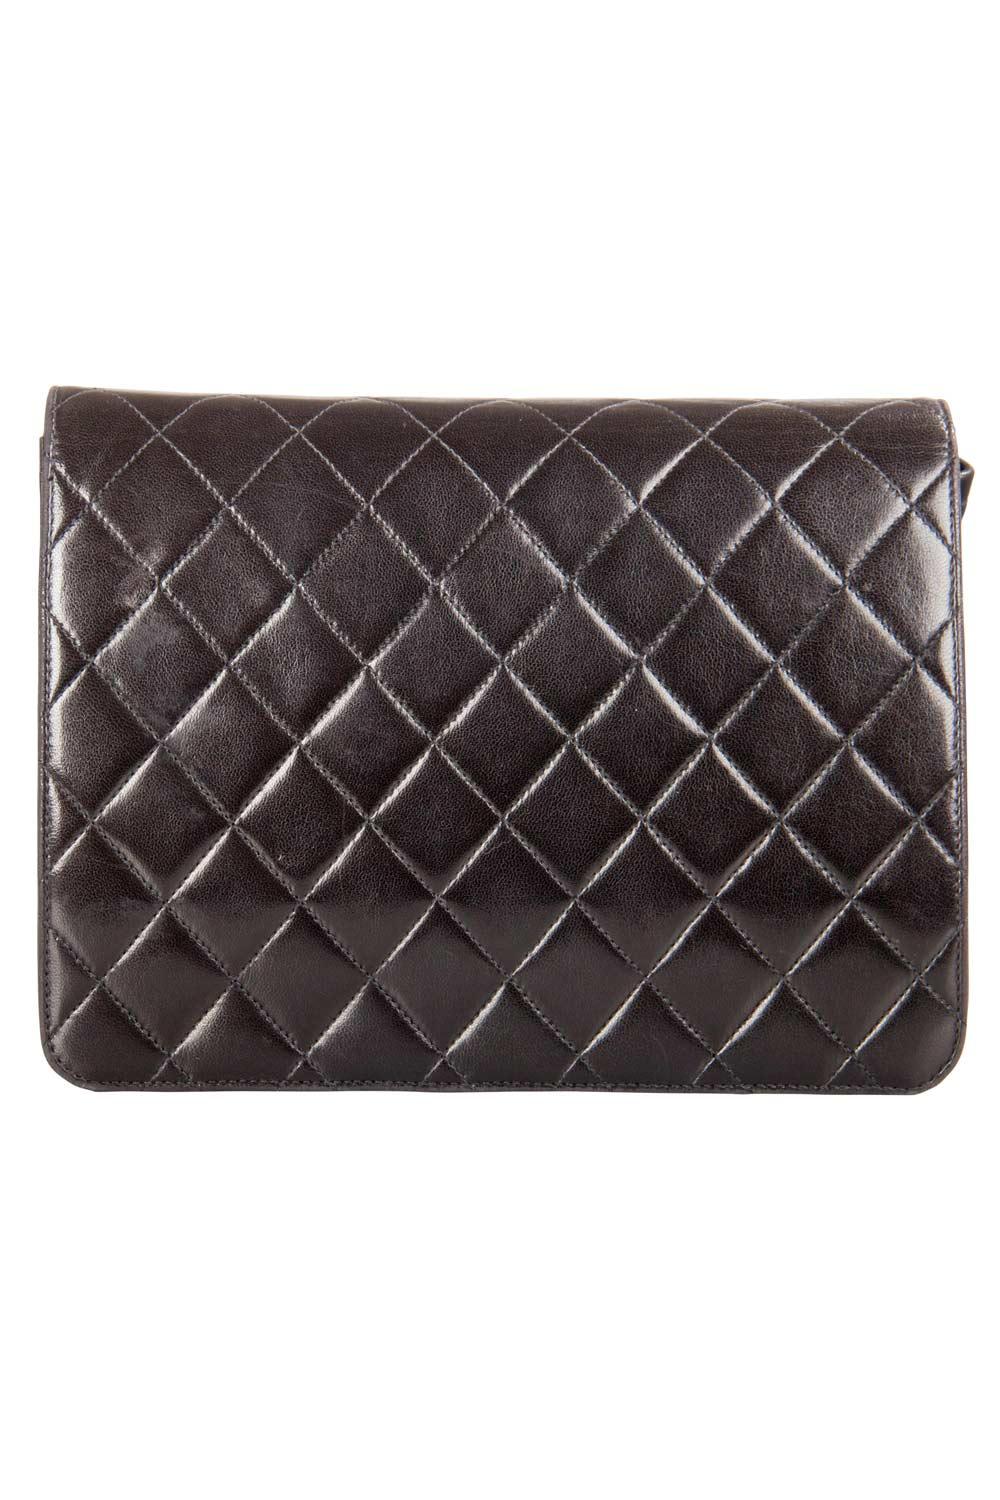 Chanel's classic flap bags are the most iconic handbags in the fashion world. Totally worth the splurge, these bags, that have become a symbol of class and luxury, carries unparalleled elegance and charm. This Vintage classic single flap bag is